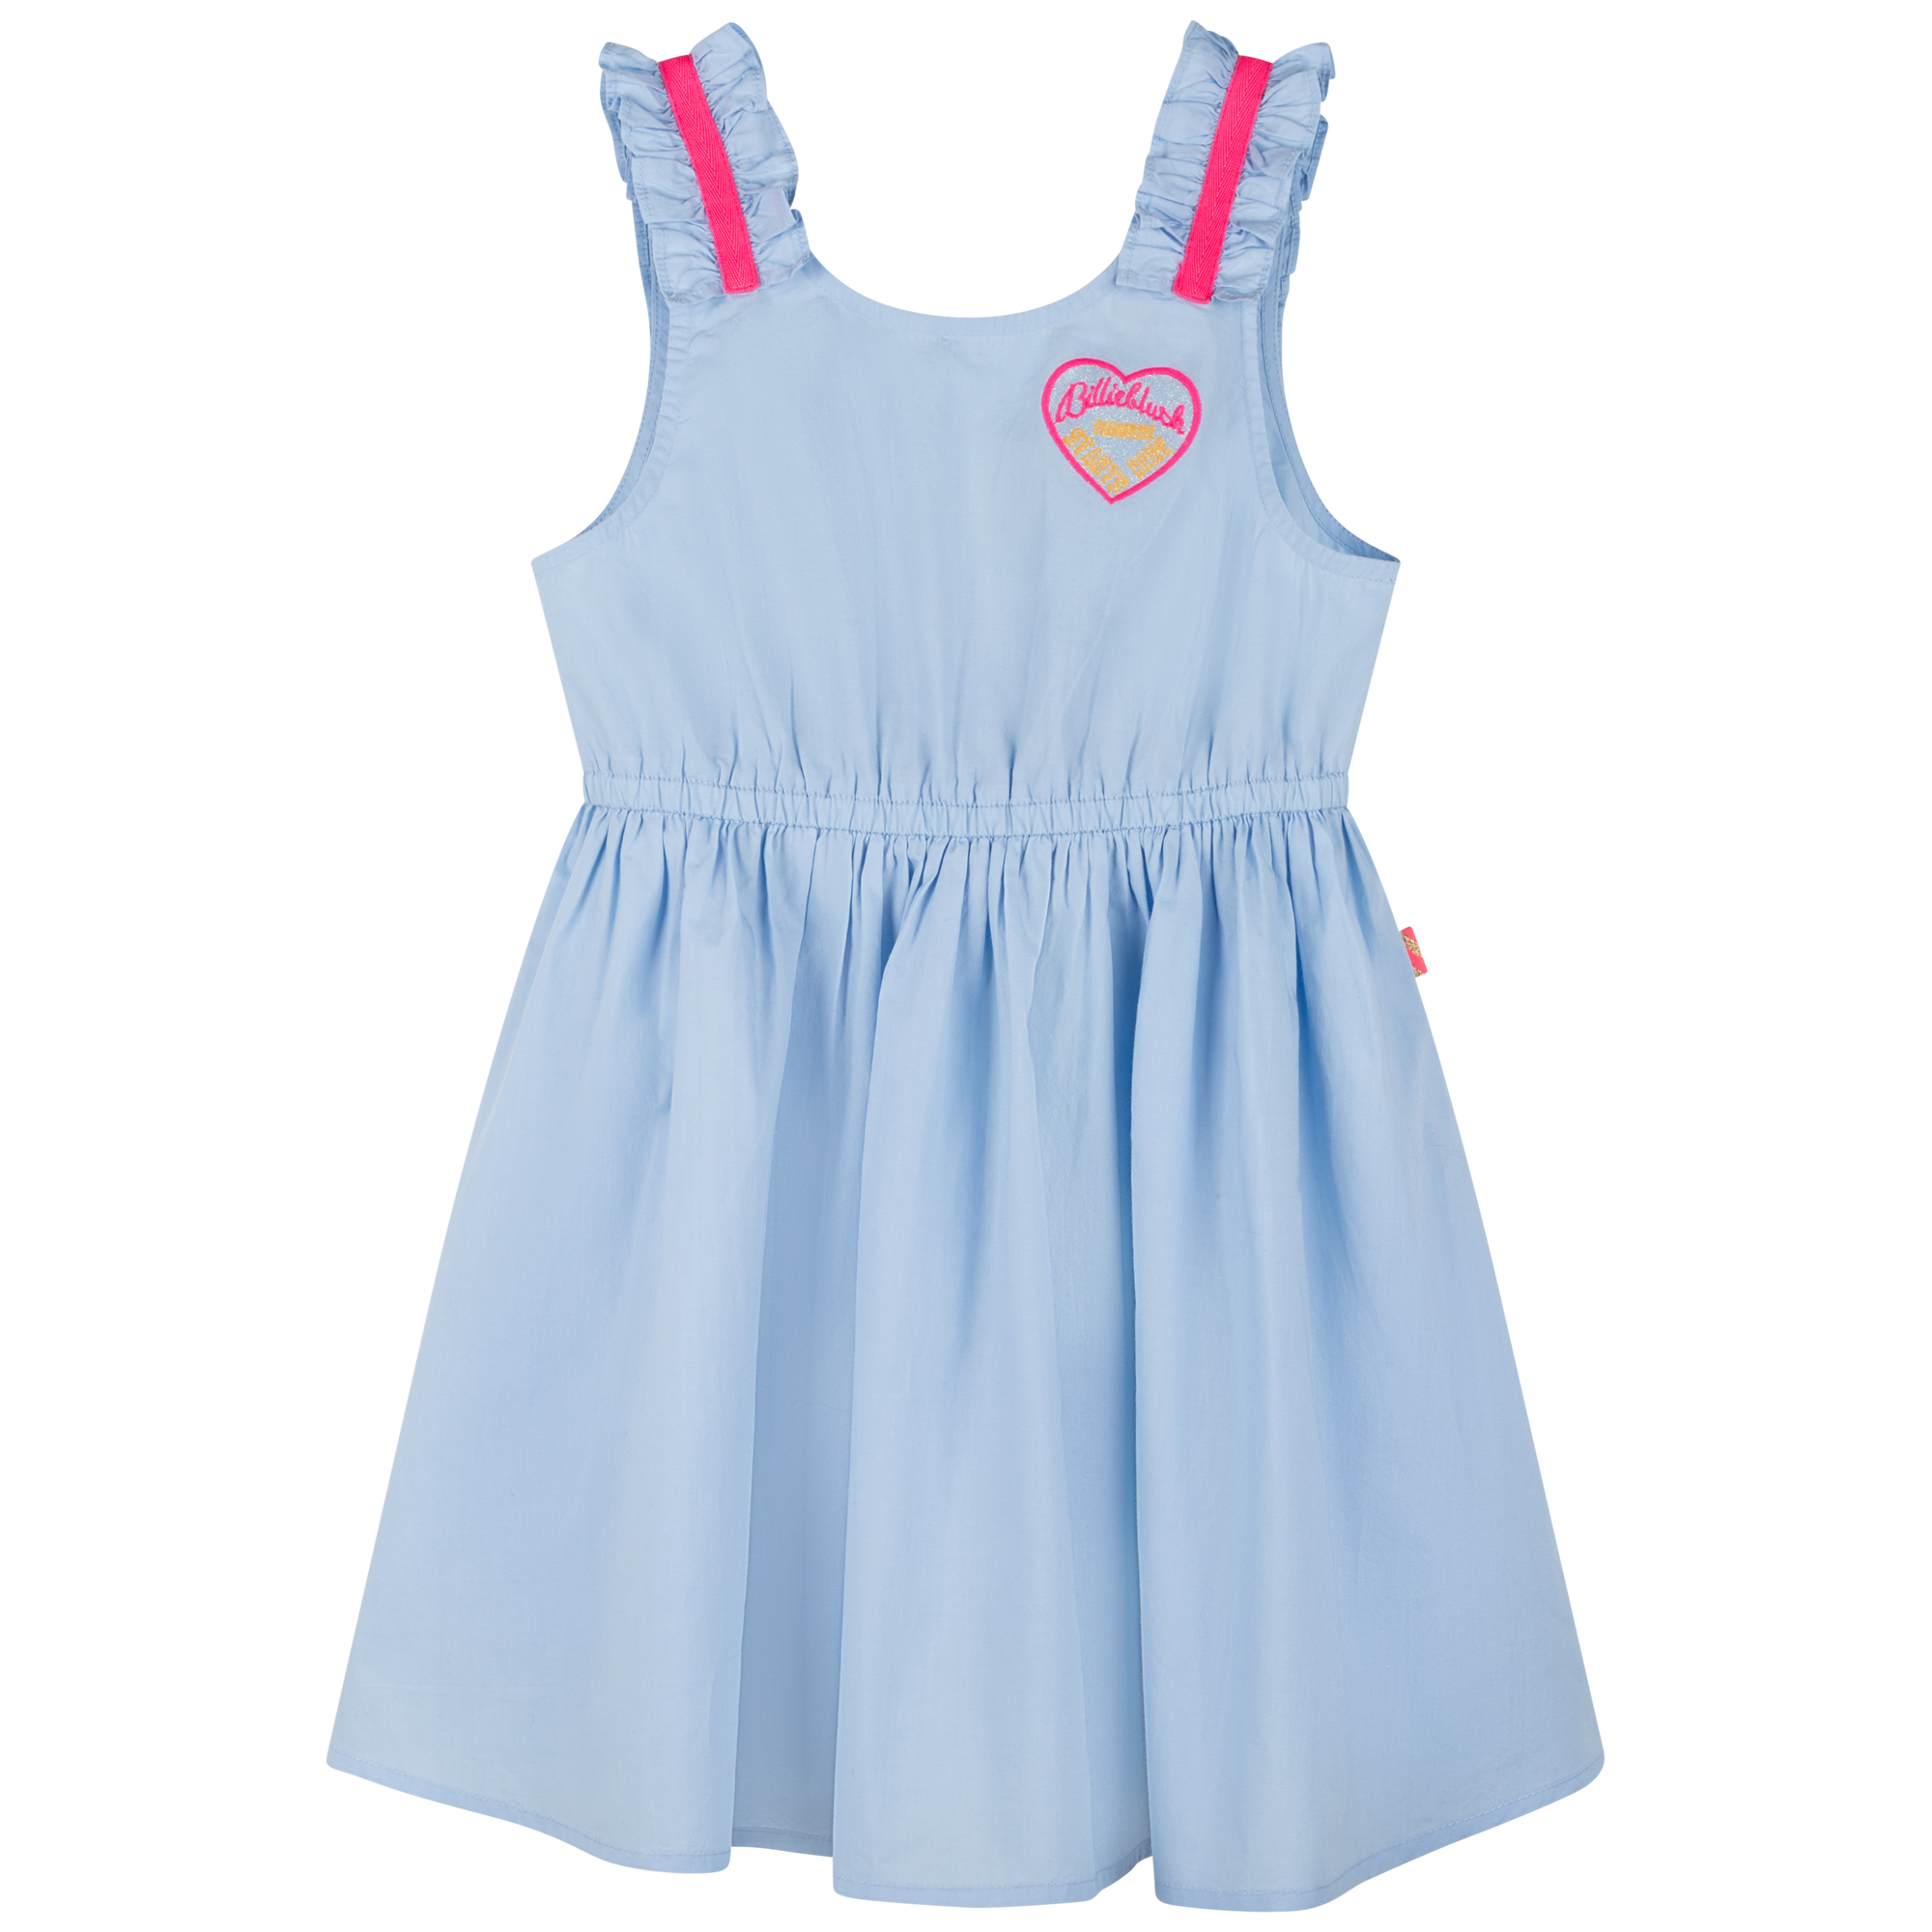 lungi dress for baby girl